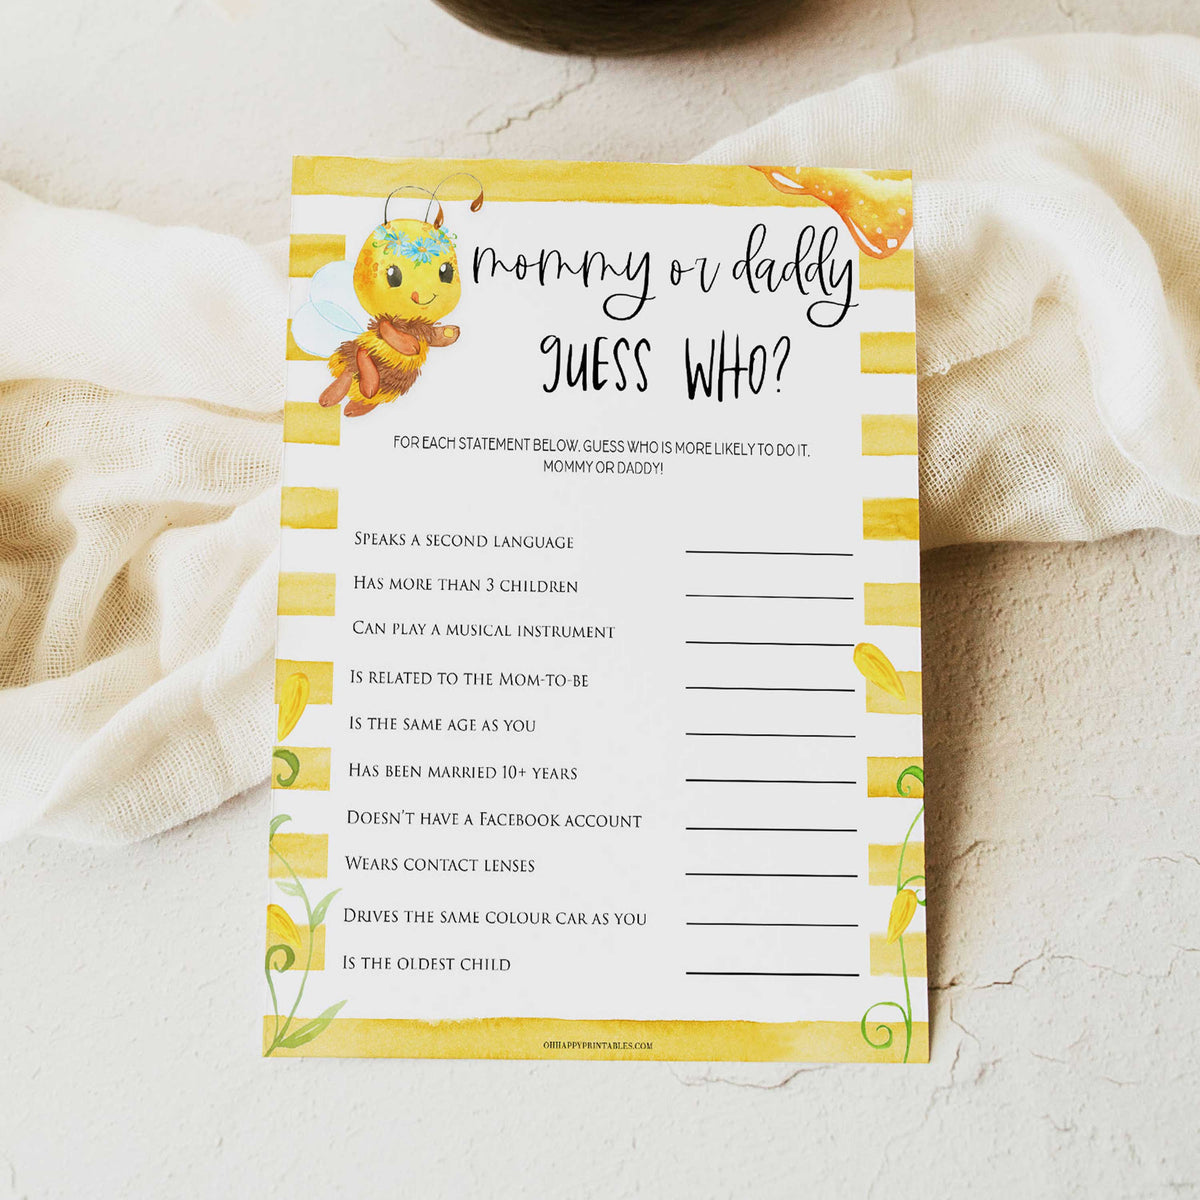 guess who mommy or daddy game, Printable baby shower games, mommy bee fun baby games, baby shower games, fun baby shower ideas, top baby shower ideas, mommy to bee baby shower, friends baby shower ideas